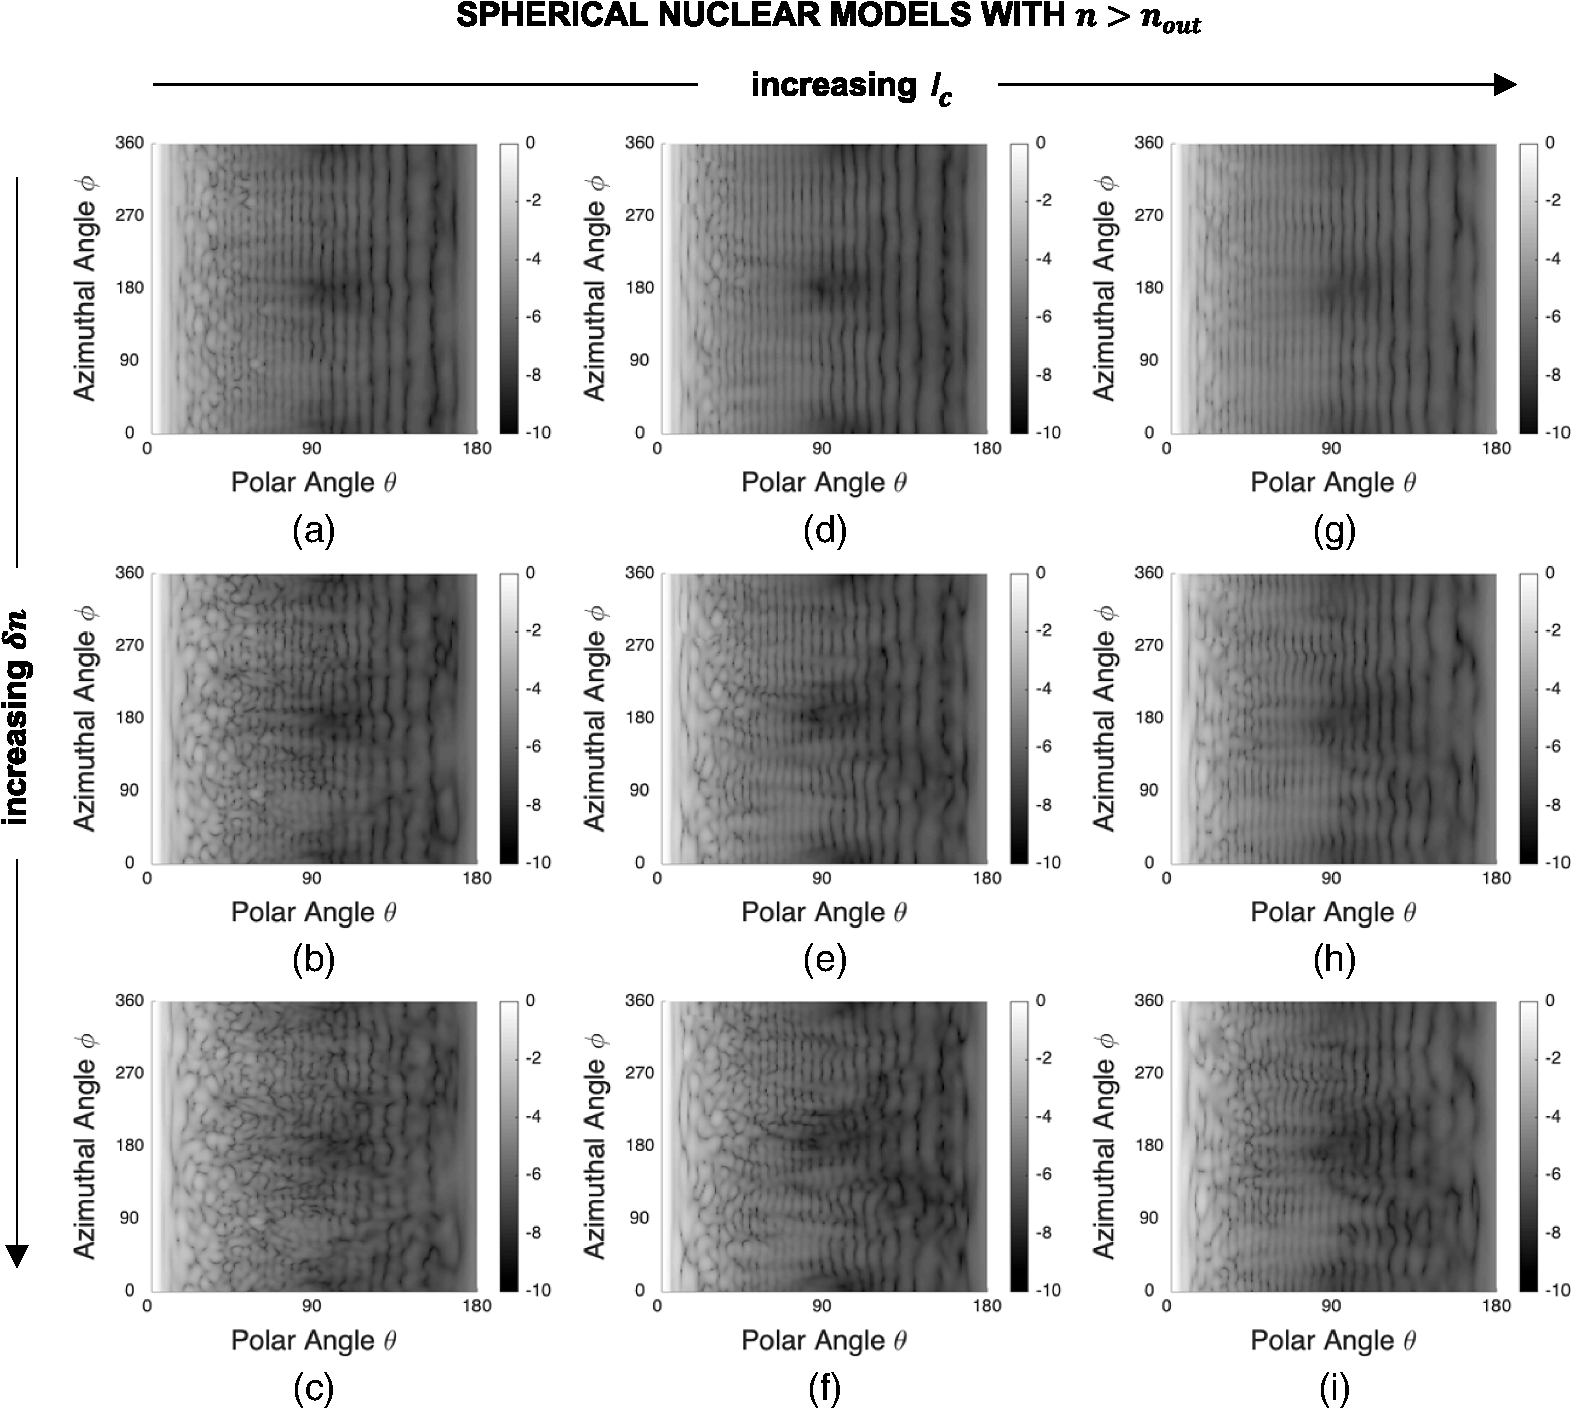 Assessment Of Internal Refractive Index Profile Of Stochastically Inhomogeneous Nuclear Models Via Analysis Of Two Dimensional Optical Scattering Patterns